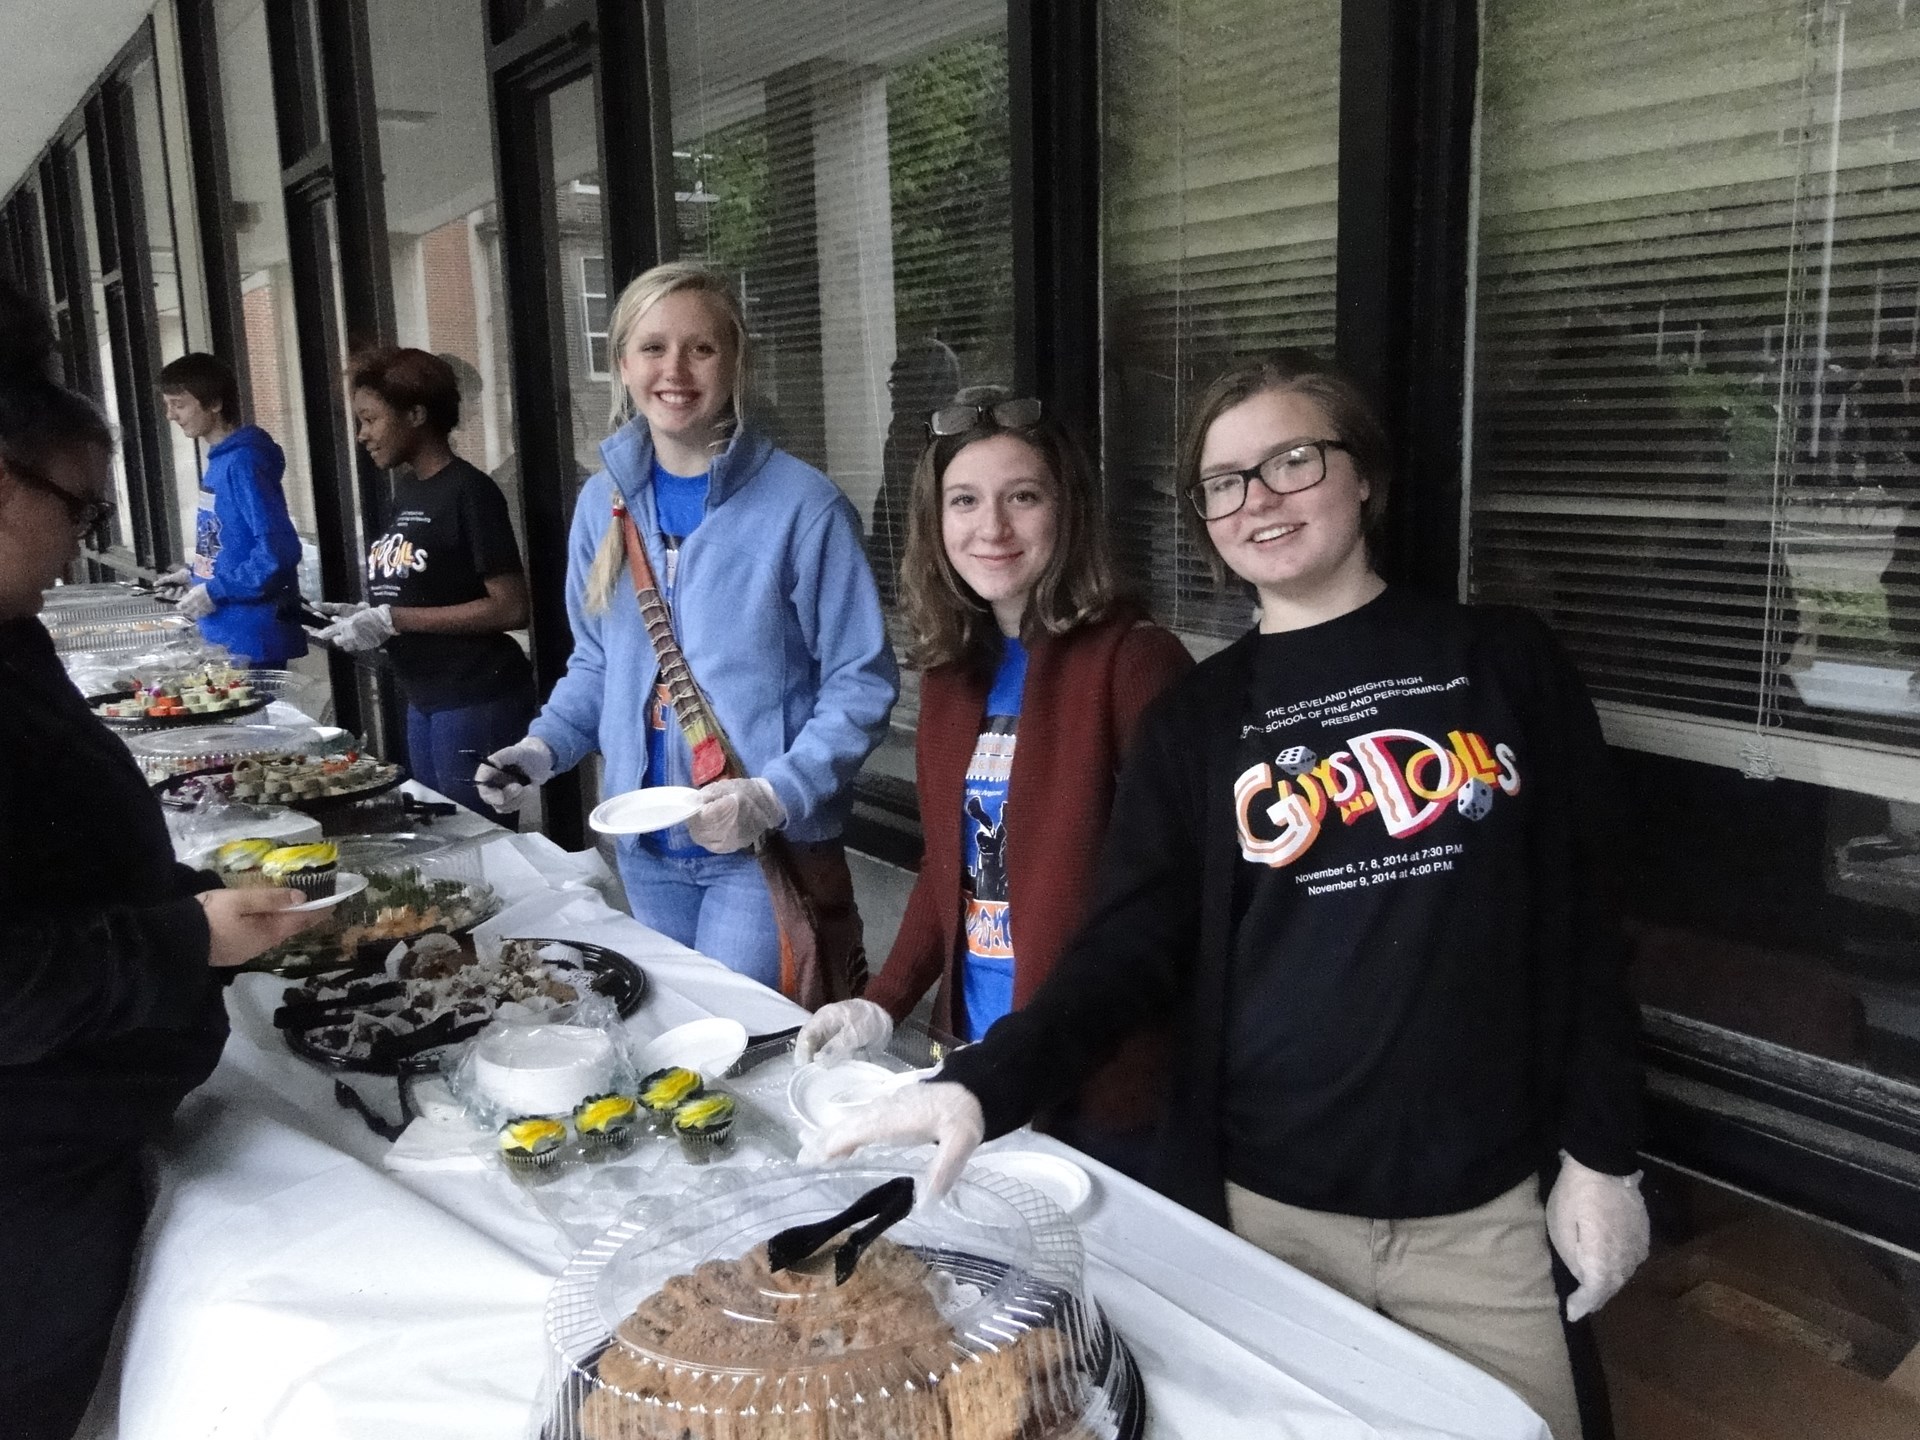 Students helping serve food during the event